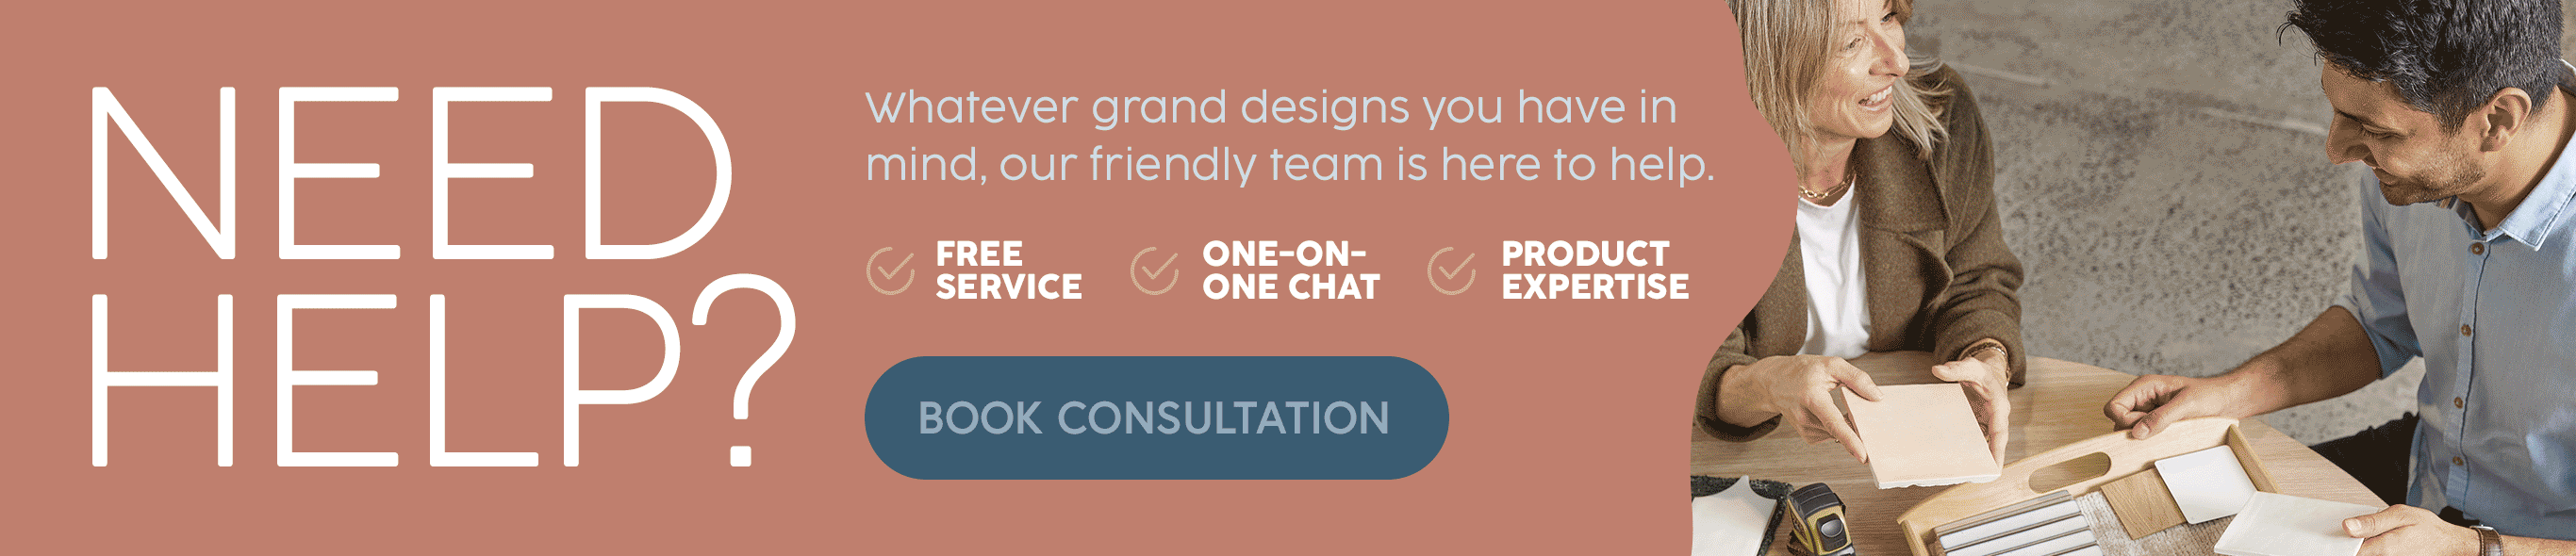 Need help? Book a consultation with our friendly team.